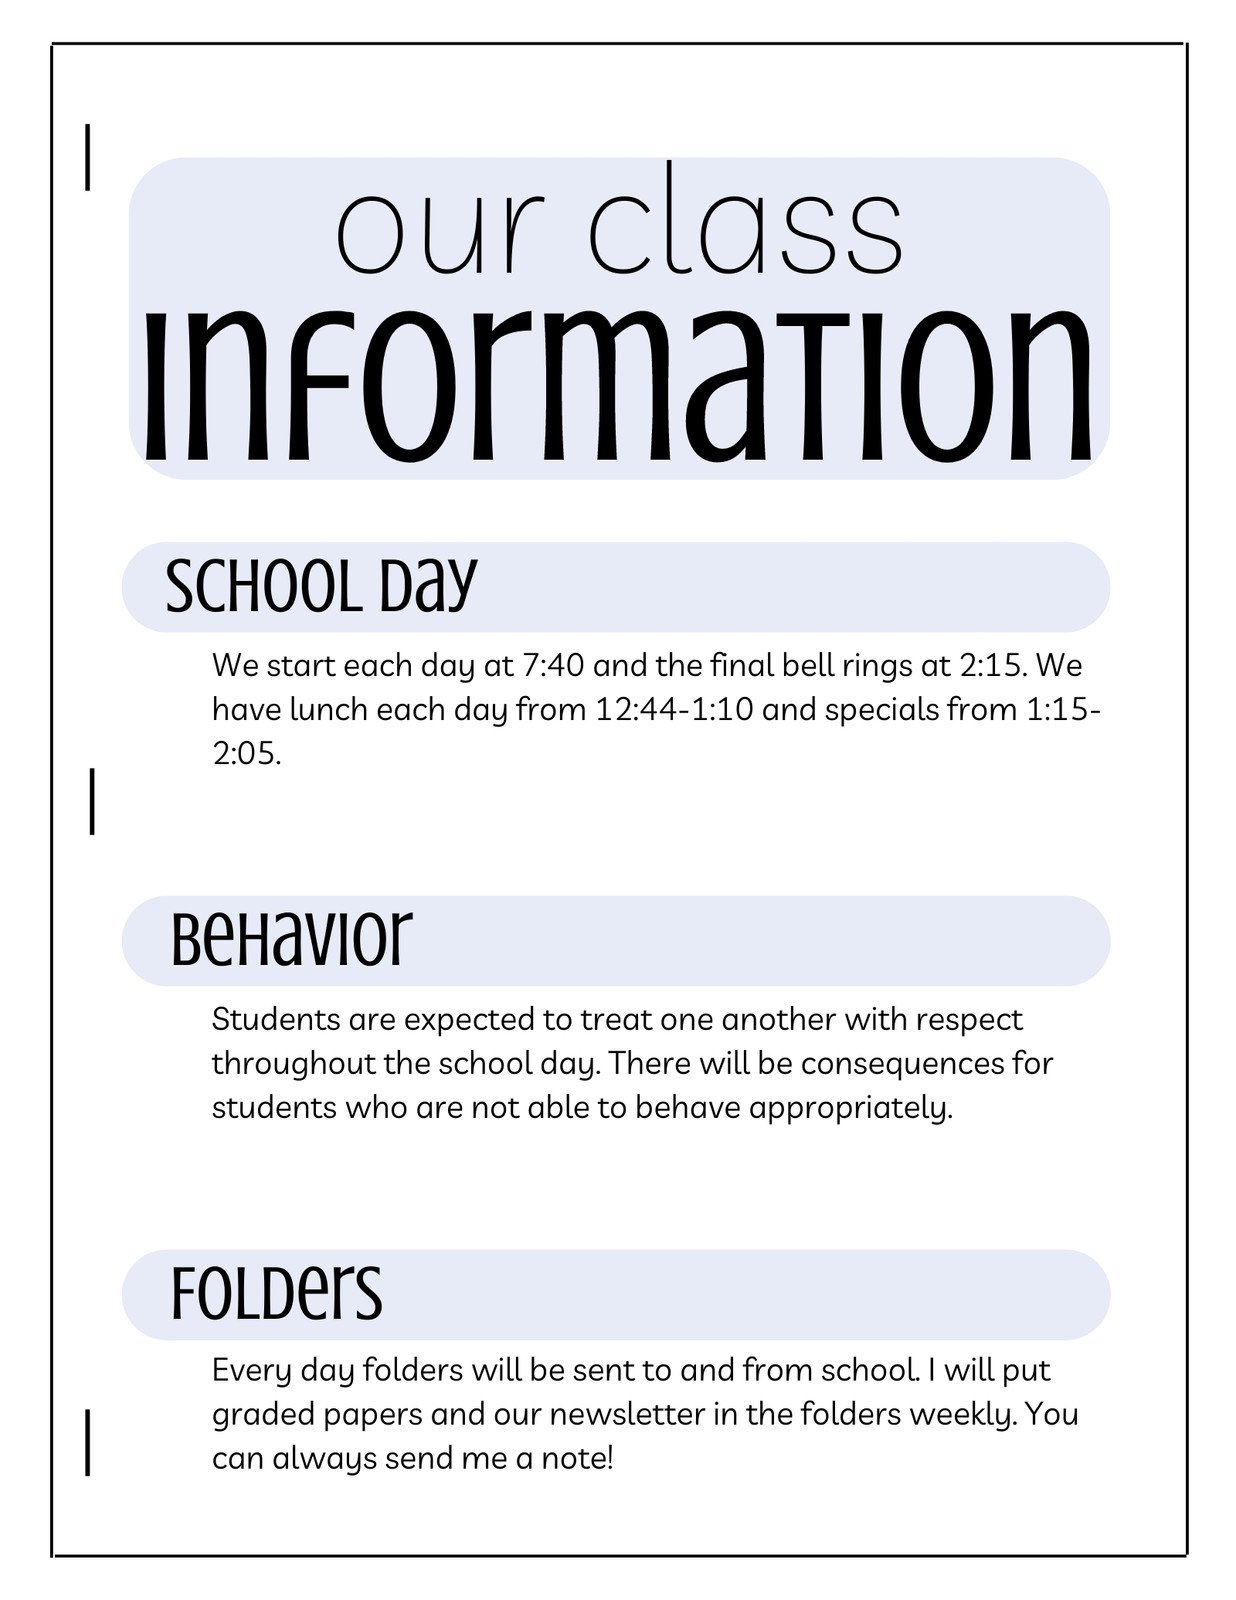 Free and customizable school templates picture